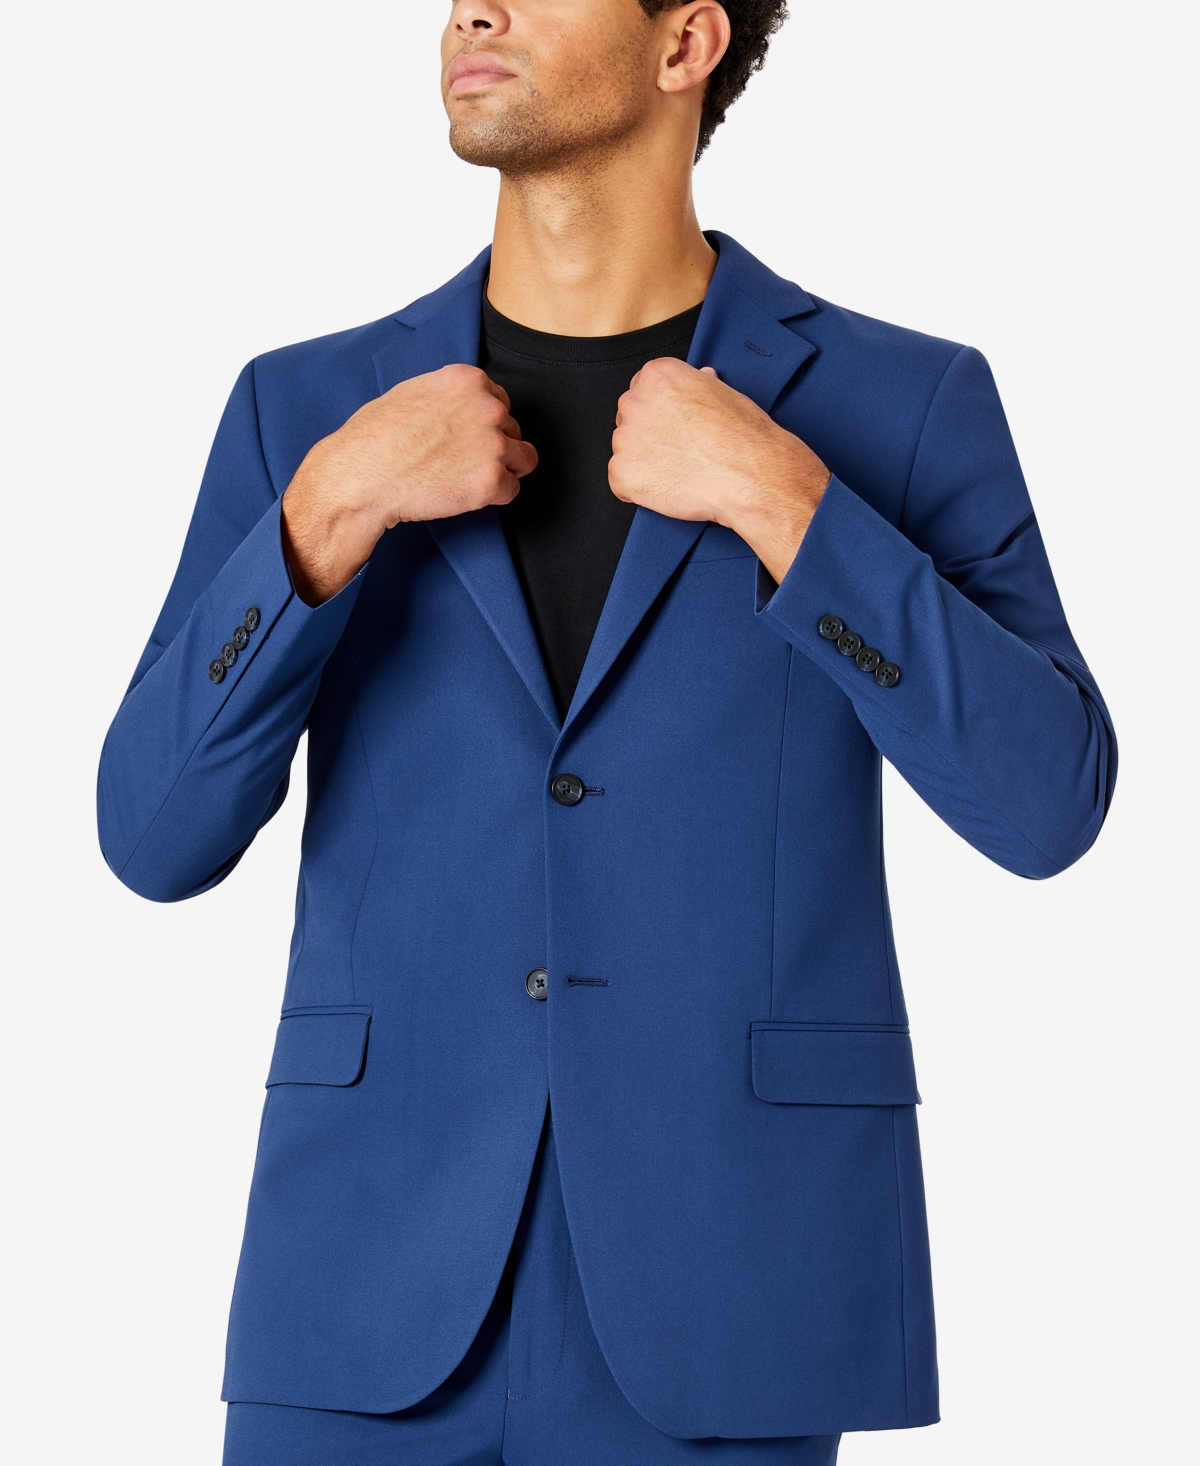 Dkny Men's Modern-fit Stretch Suit Jacket In Blue Solid